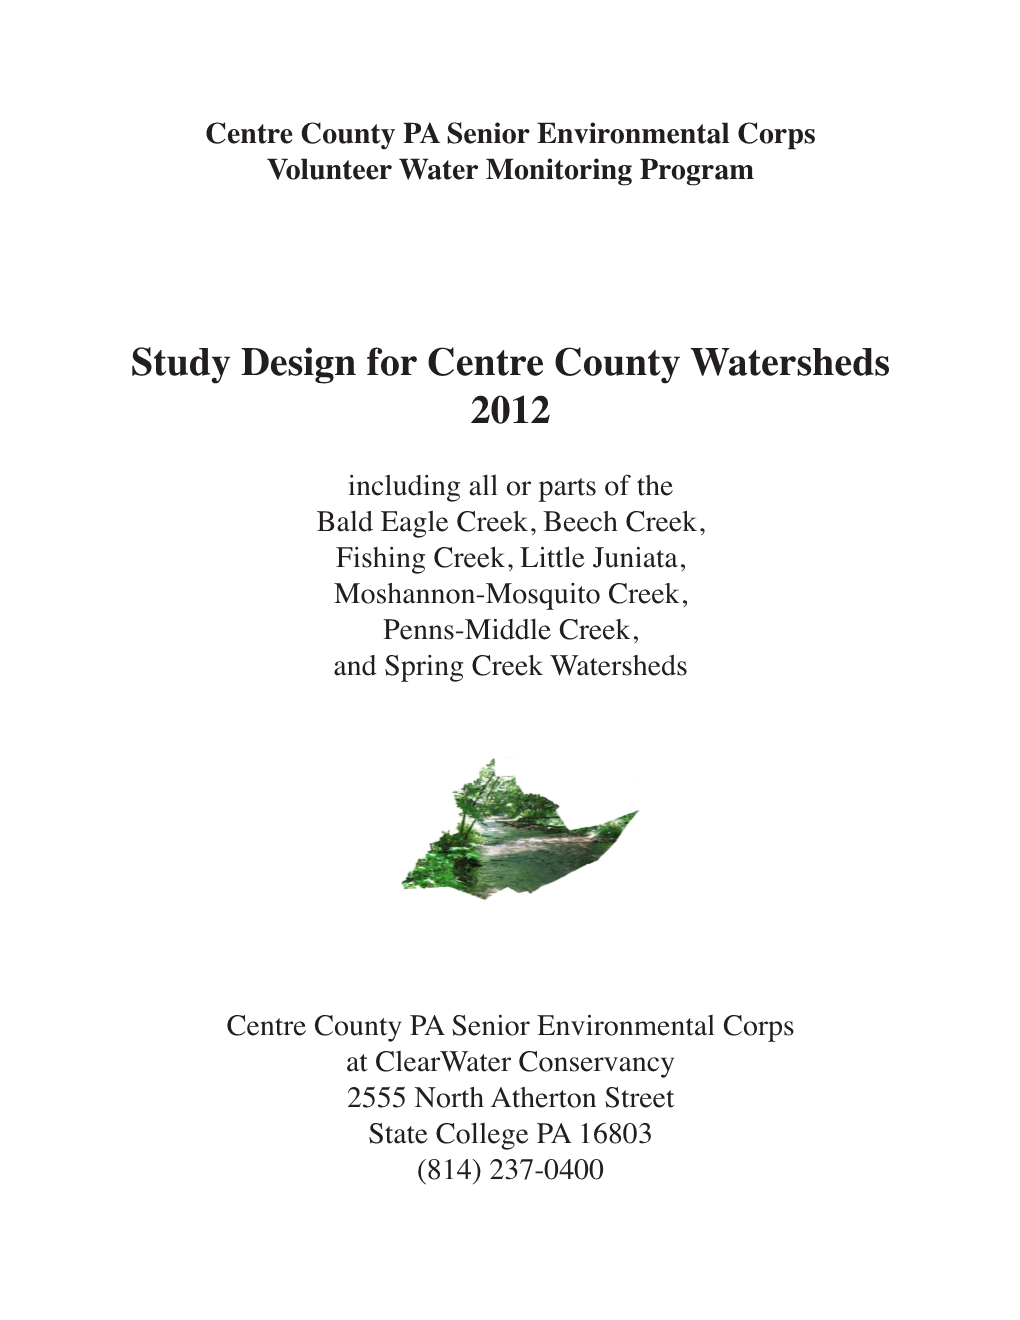 Study Design for Centre County Watersheds 2012